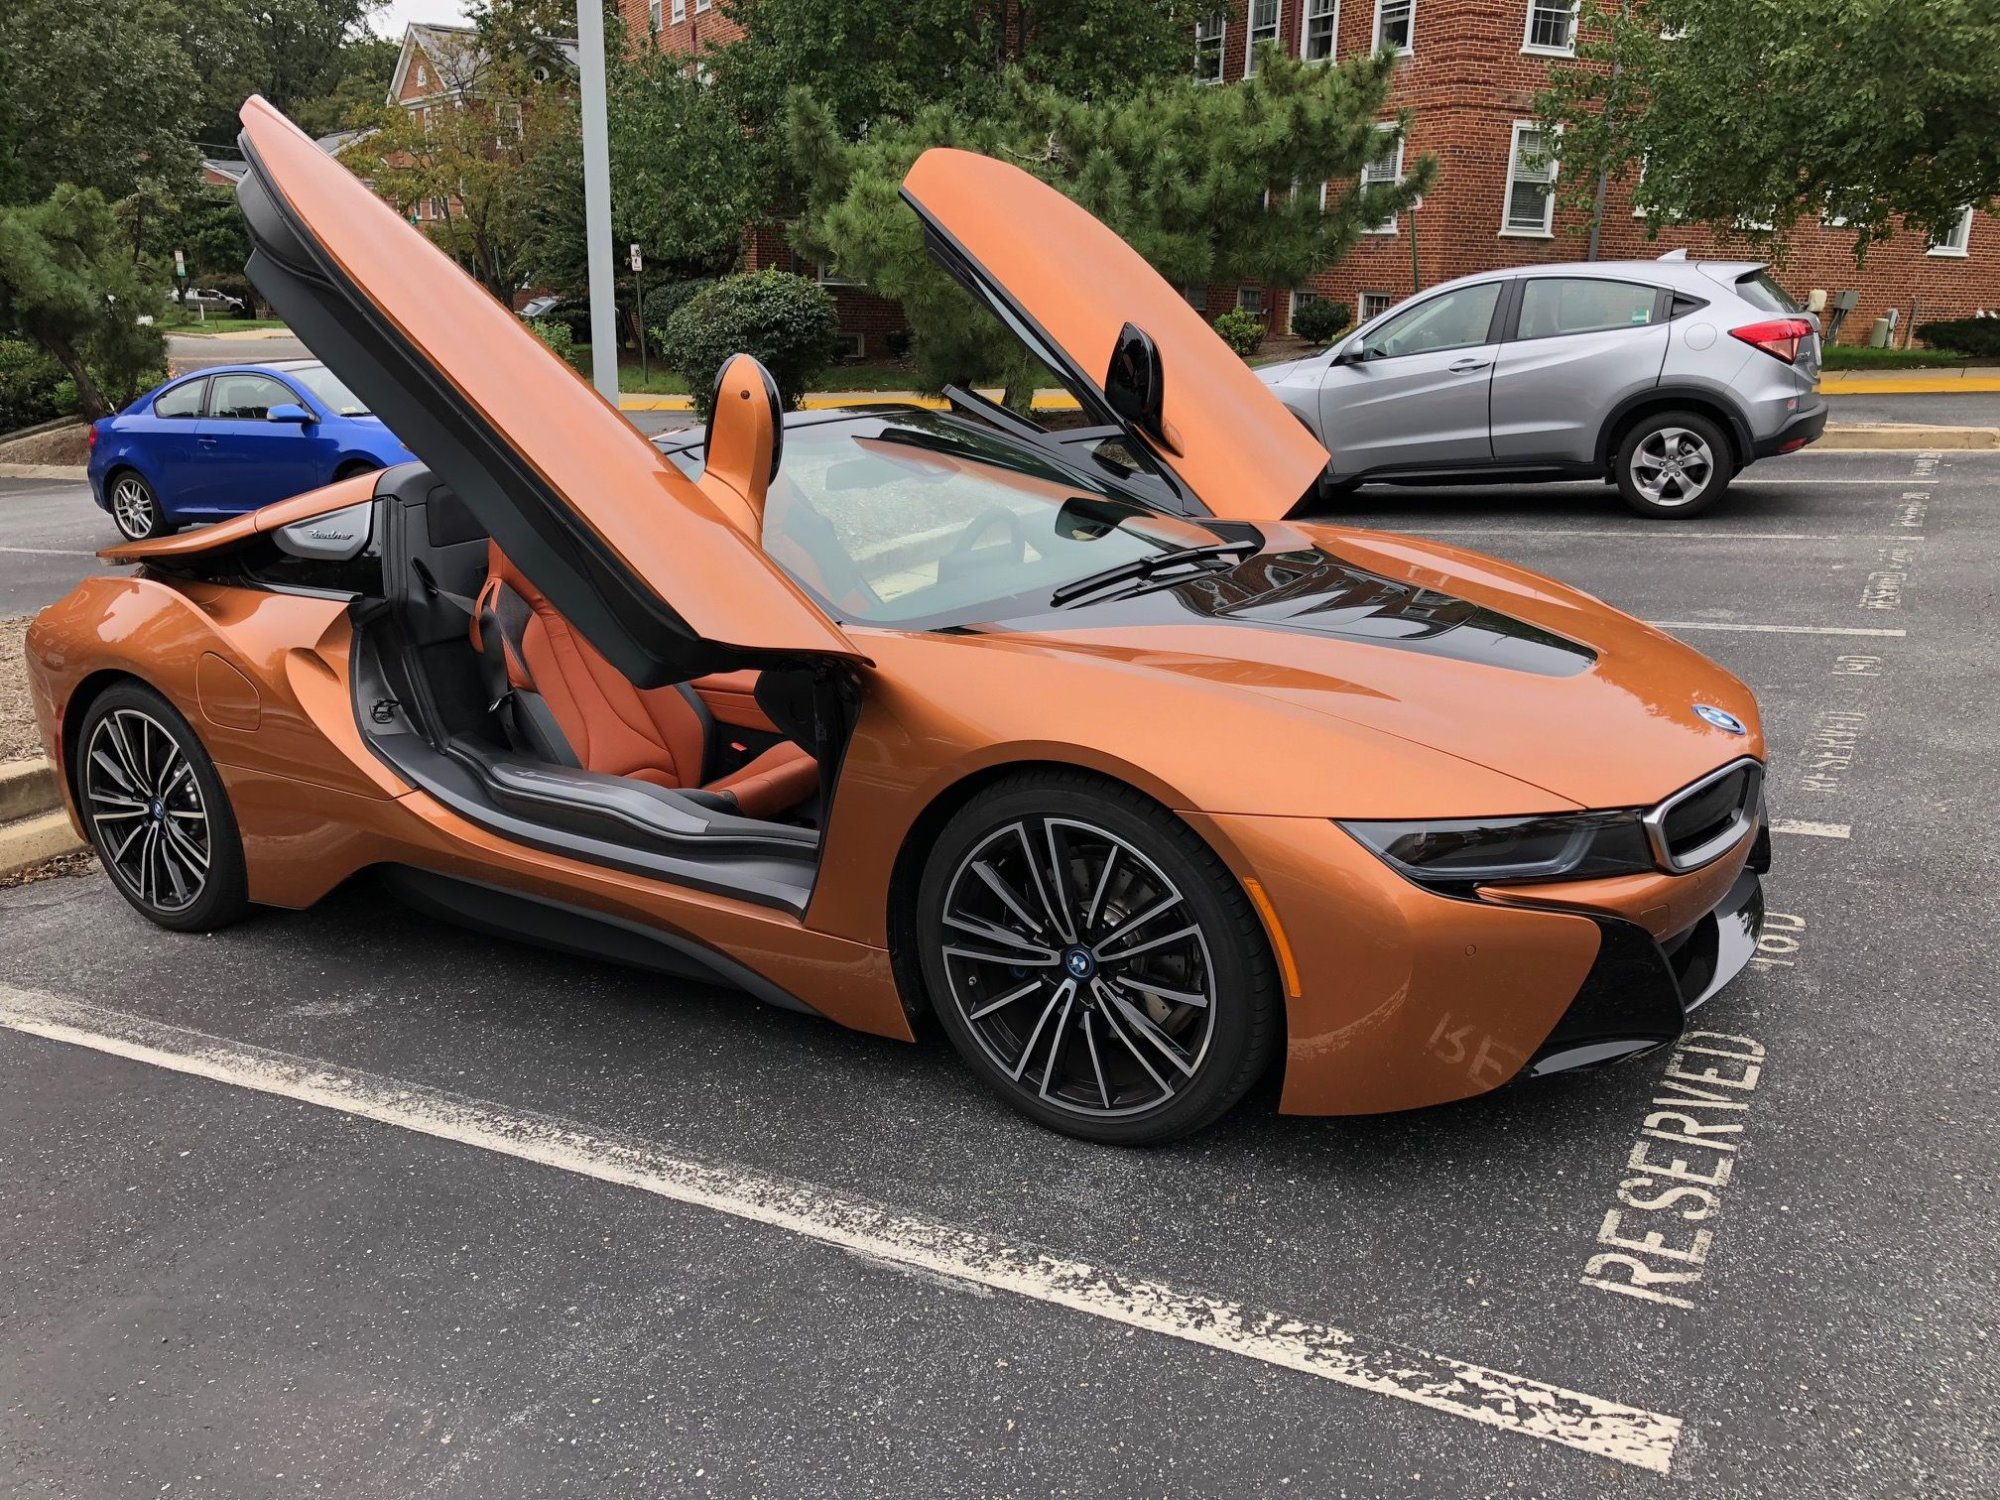 Does the BMW i8 Hybrid Sports Car Work As a Daily Driver?